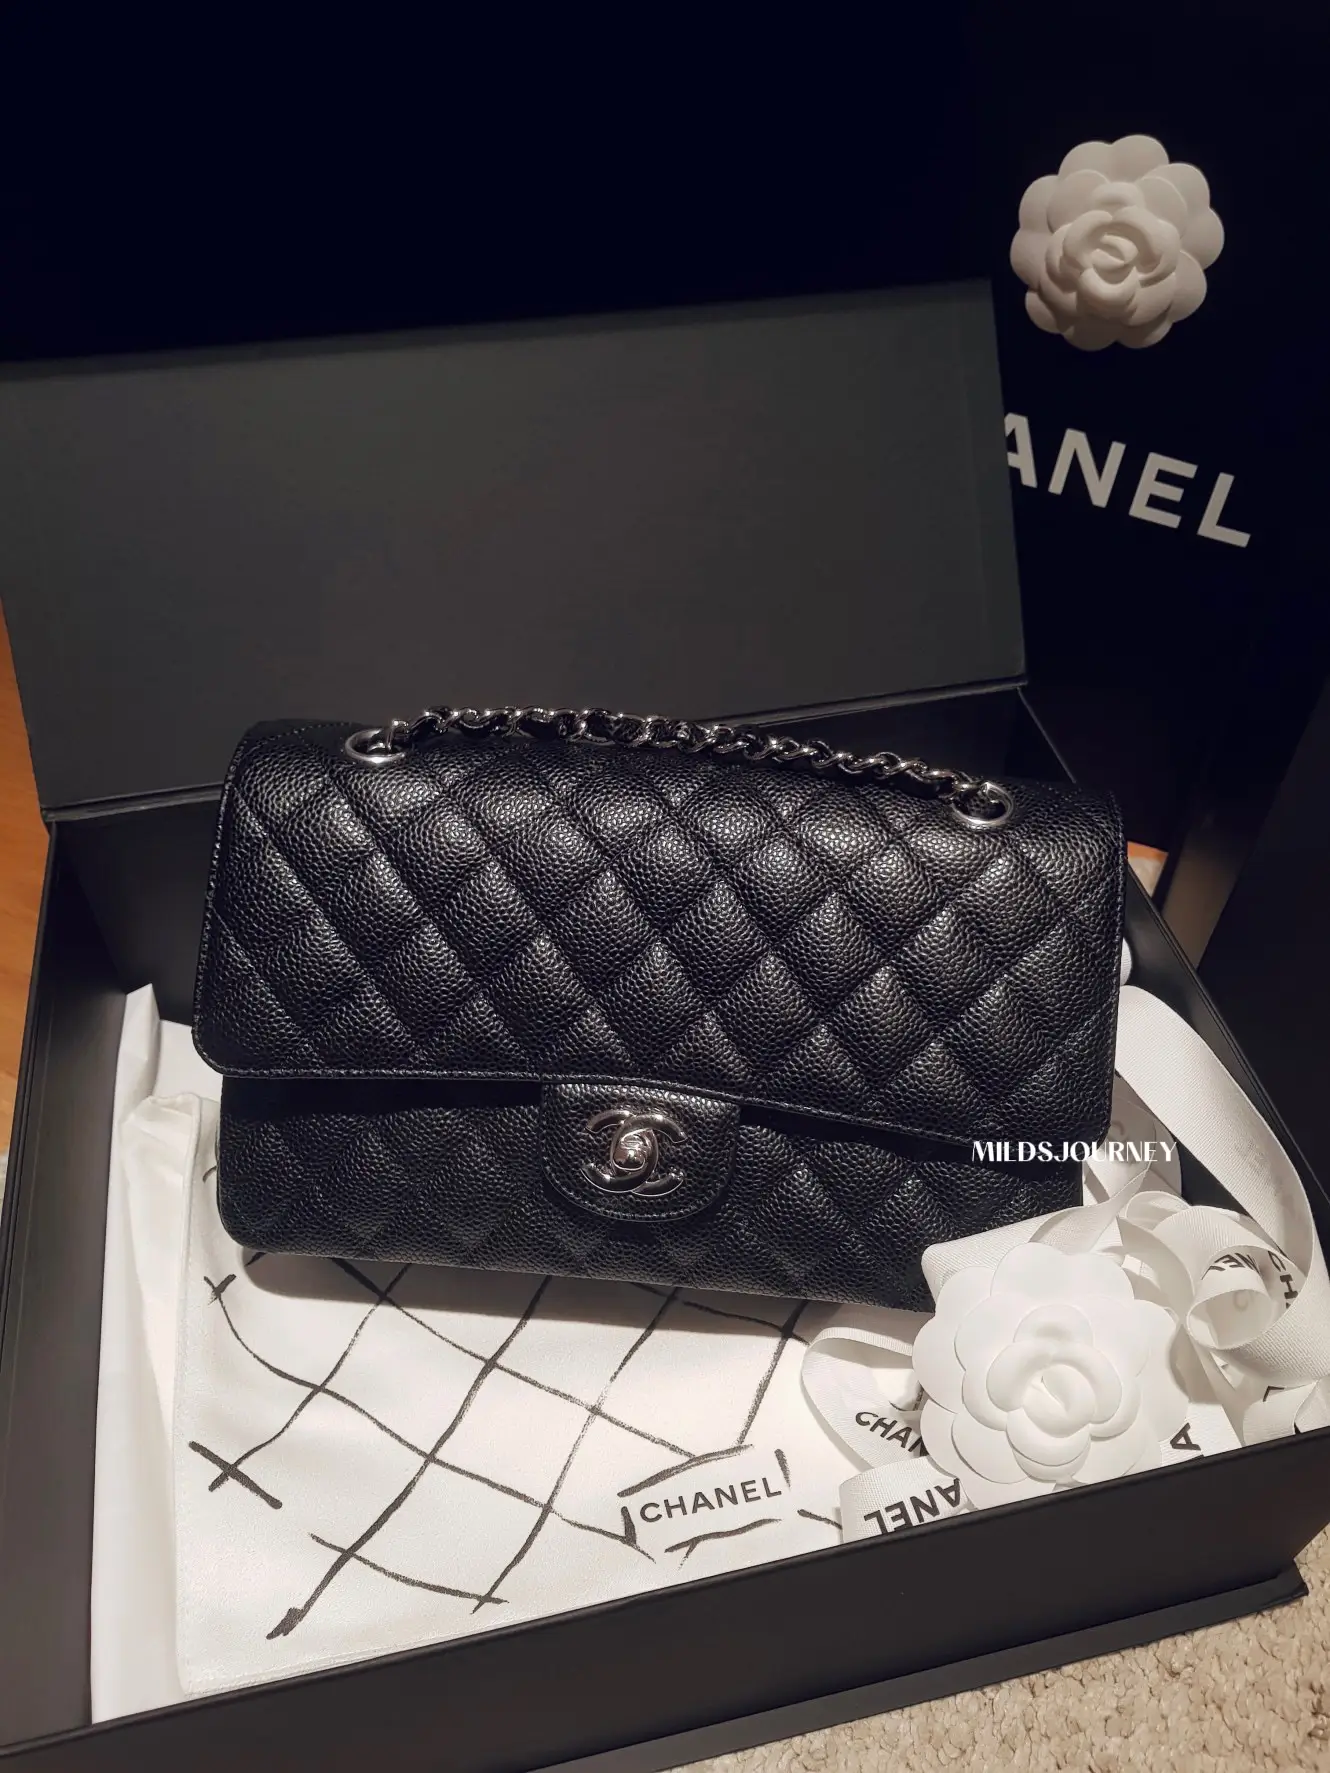 Investment Reviews Buy CHANEL CLASSIC Worth It? Girls Aim To Read!, Gallery posted by Mildsjourney